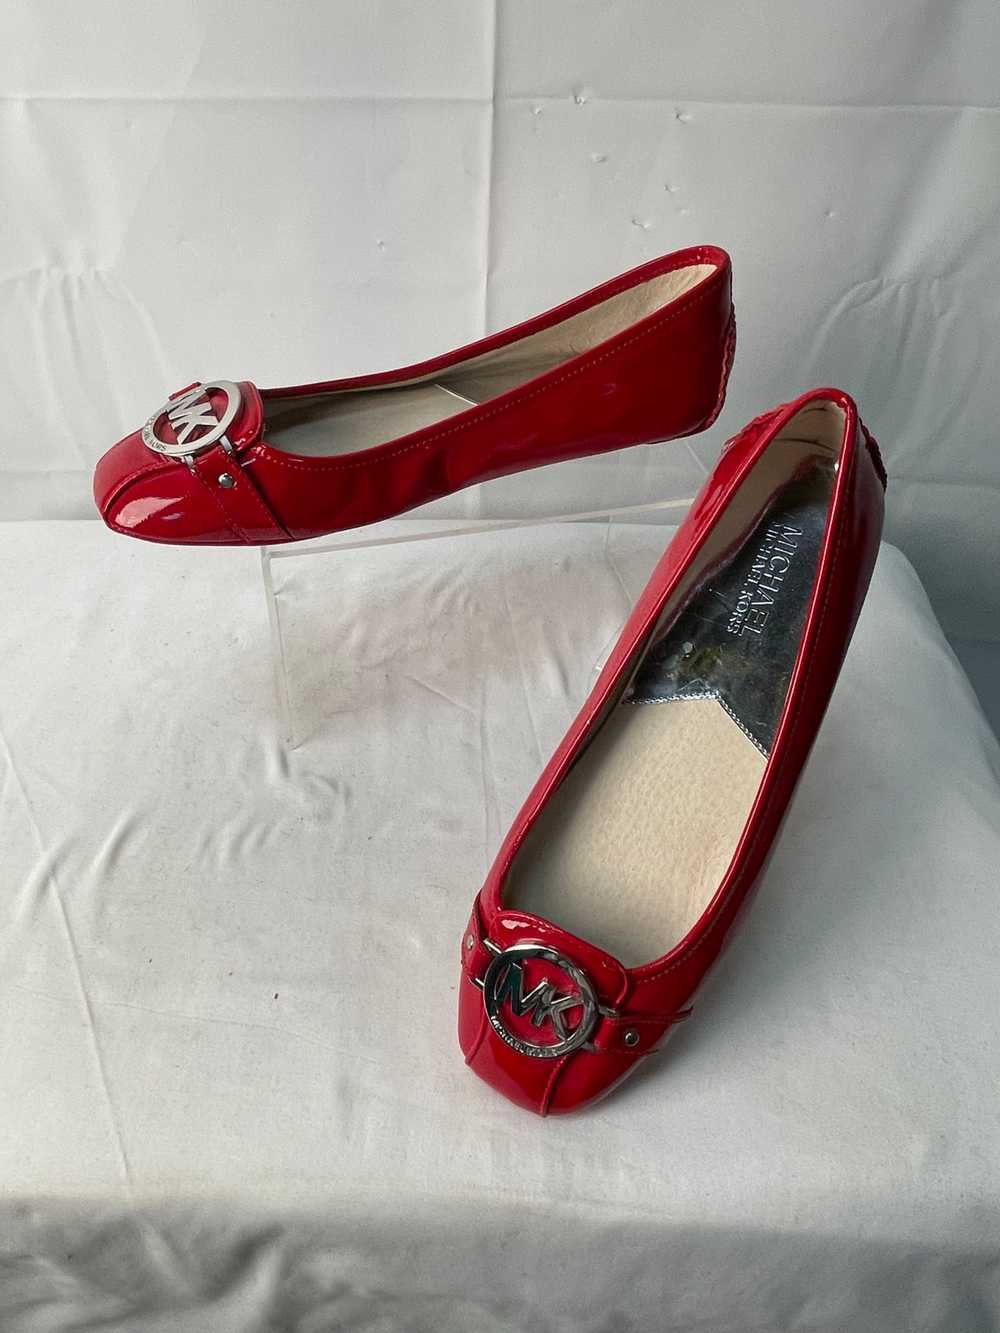 Certified Authentic Michael Kors Red Patent Leath… - image 4